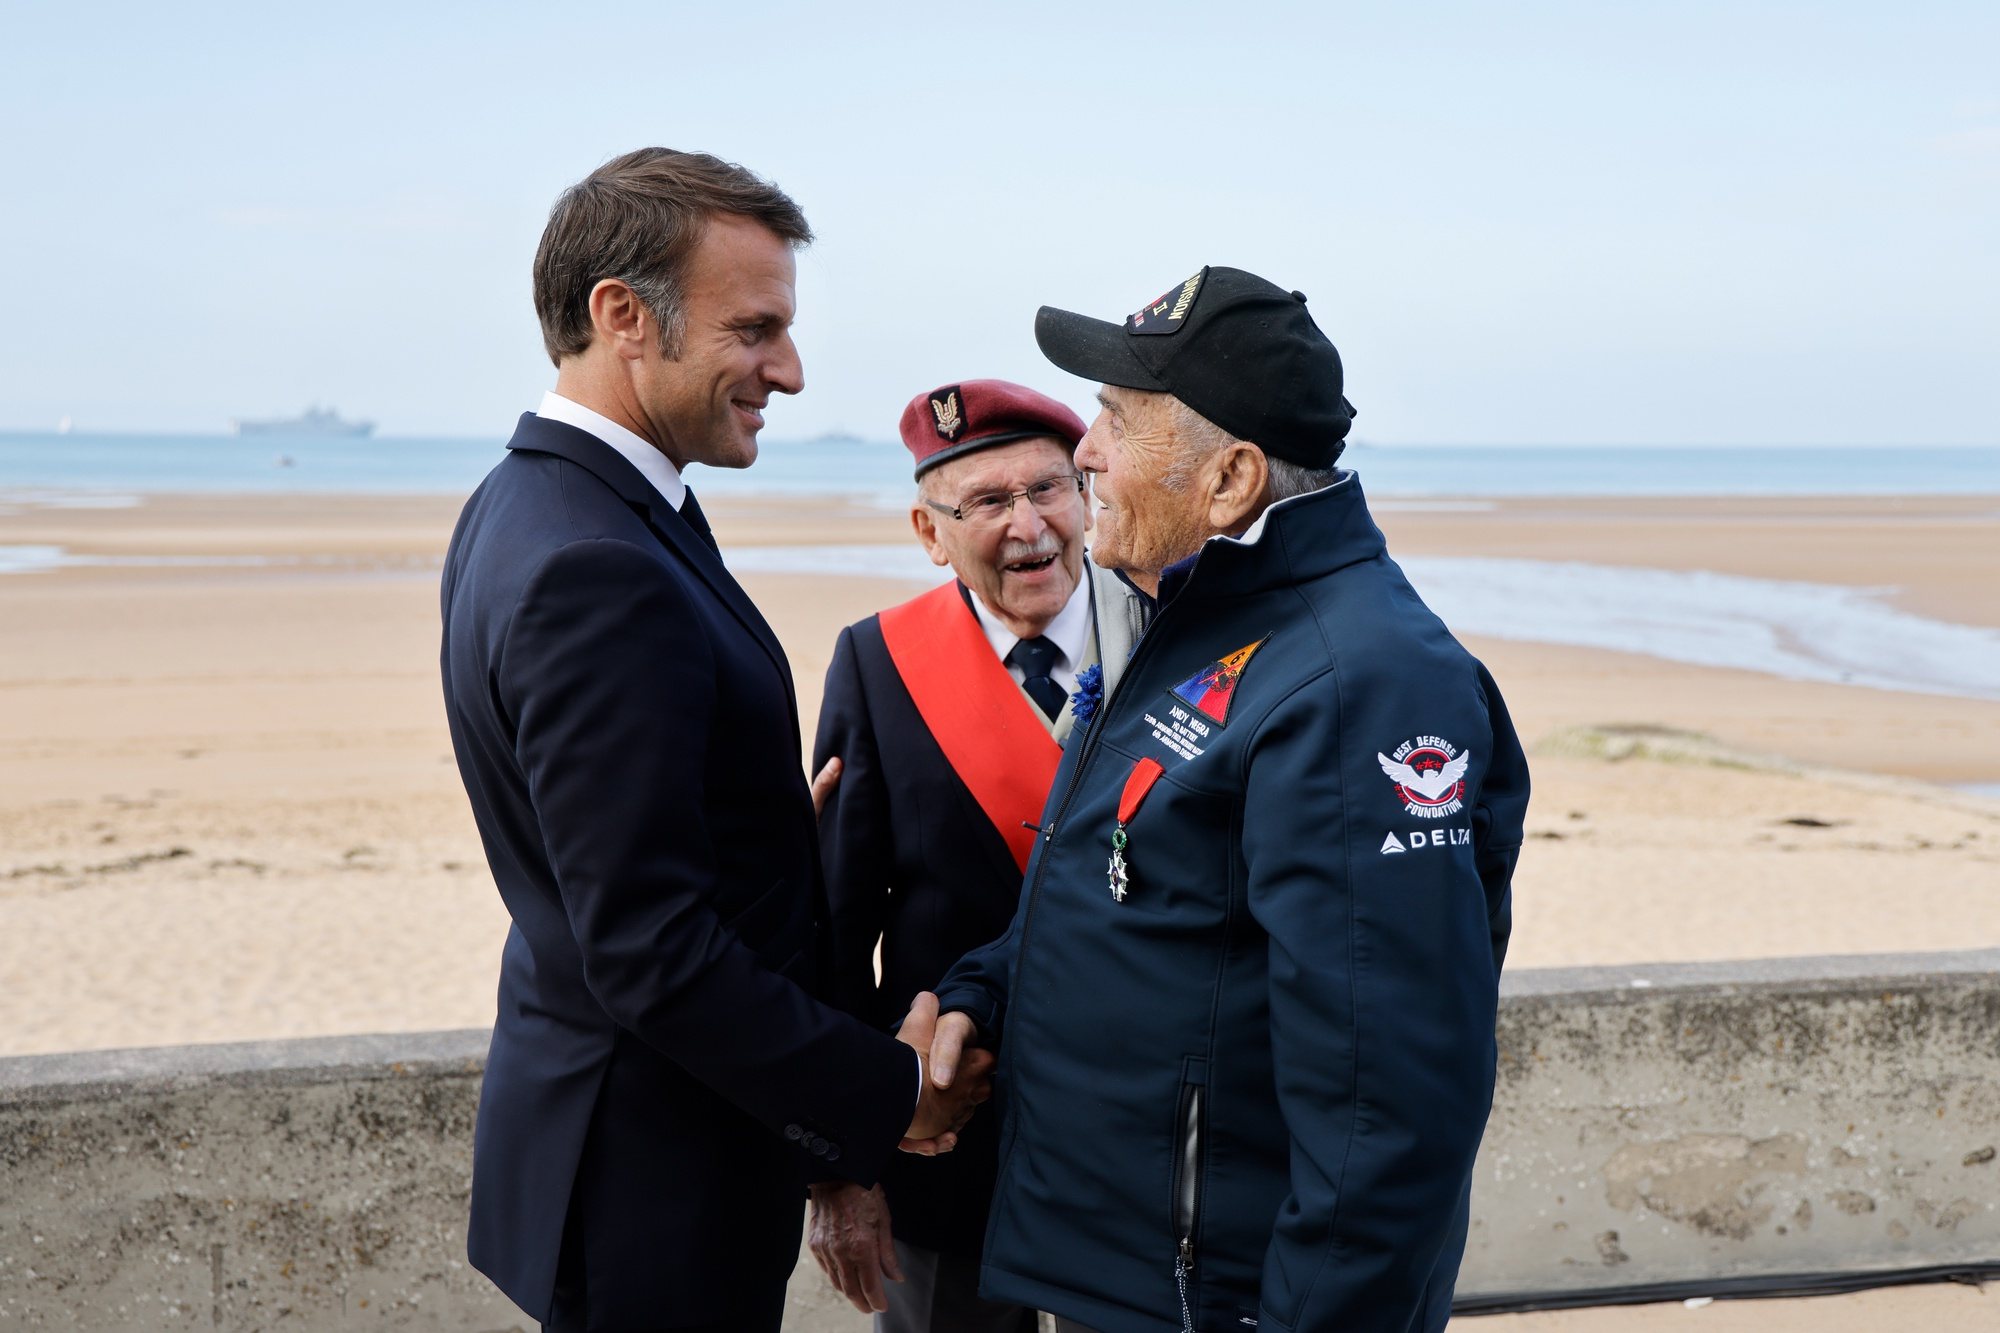 epa11394147 France&#039;s President Emmanuel Macron (L) meets with US WWII veteran Andy Negra (R), and French veteran Achille Muller, last survivor of the Free French Forces, during the International commemorative ceremony at Omaha Beach marking the 80th anniversary of the World War II &#039;D-Day&#039; Allied landings in Normandy, in Saint-Laurent-sur-Mer, in northwestern France, 06 June 2024. The D-Day ceremonies on June 6 mark the 80th anniversary since the launch of &#039;Operation Overlord&#039;, a vast military operation by Allied forces in Normandy, which turned the tide of World War II, eventually leading to the liberation of occupied France and the end of the war against Nazi Germany.  EPA/LUDOVIC MARIN / POOL  MAXPPP OUT